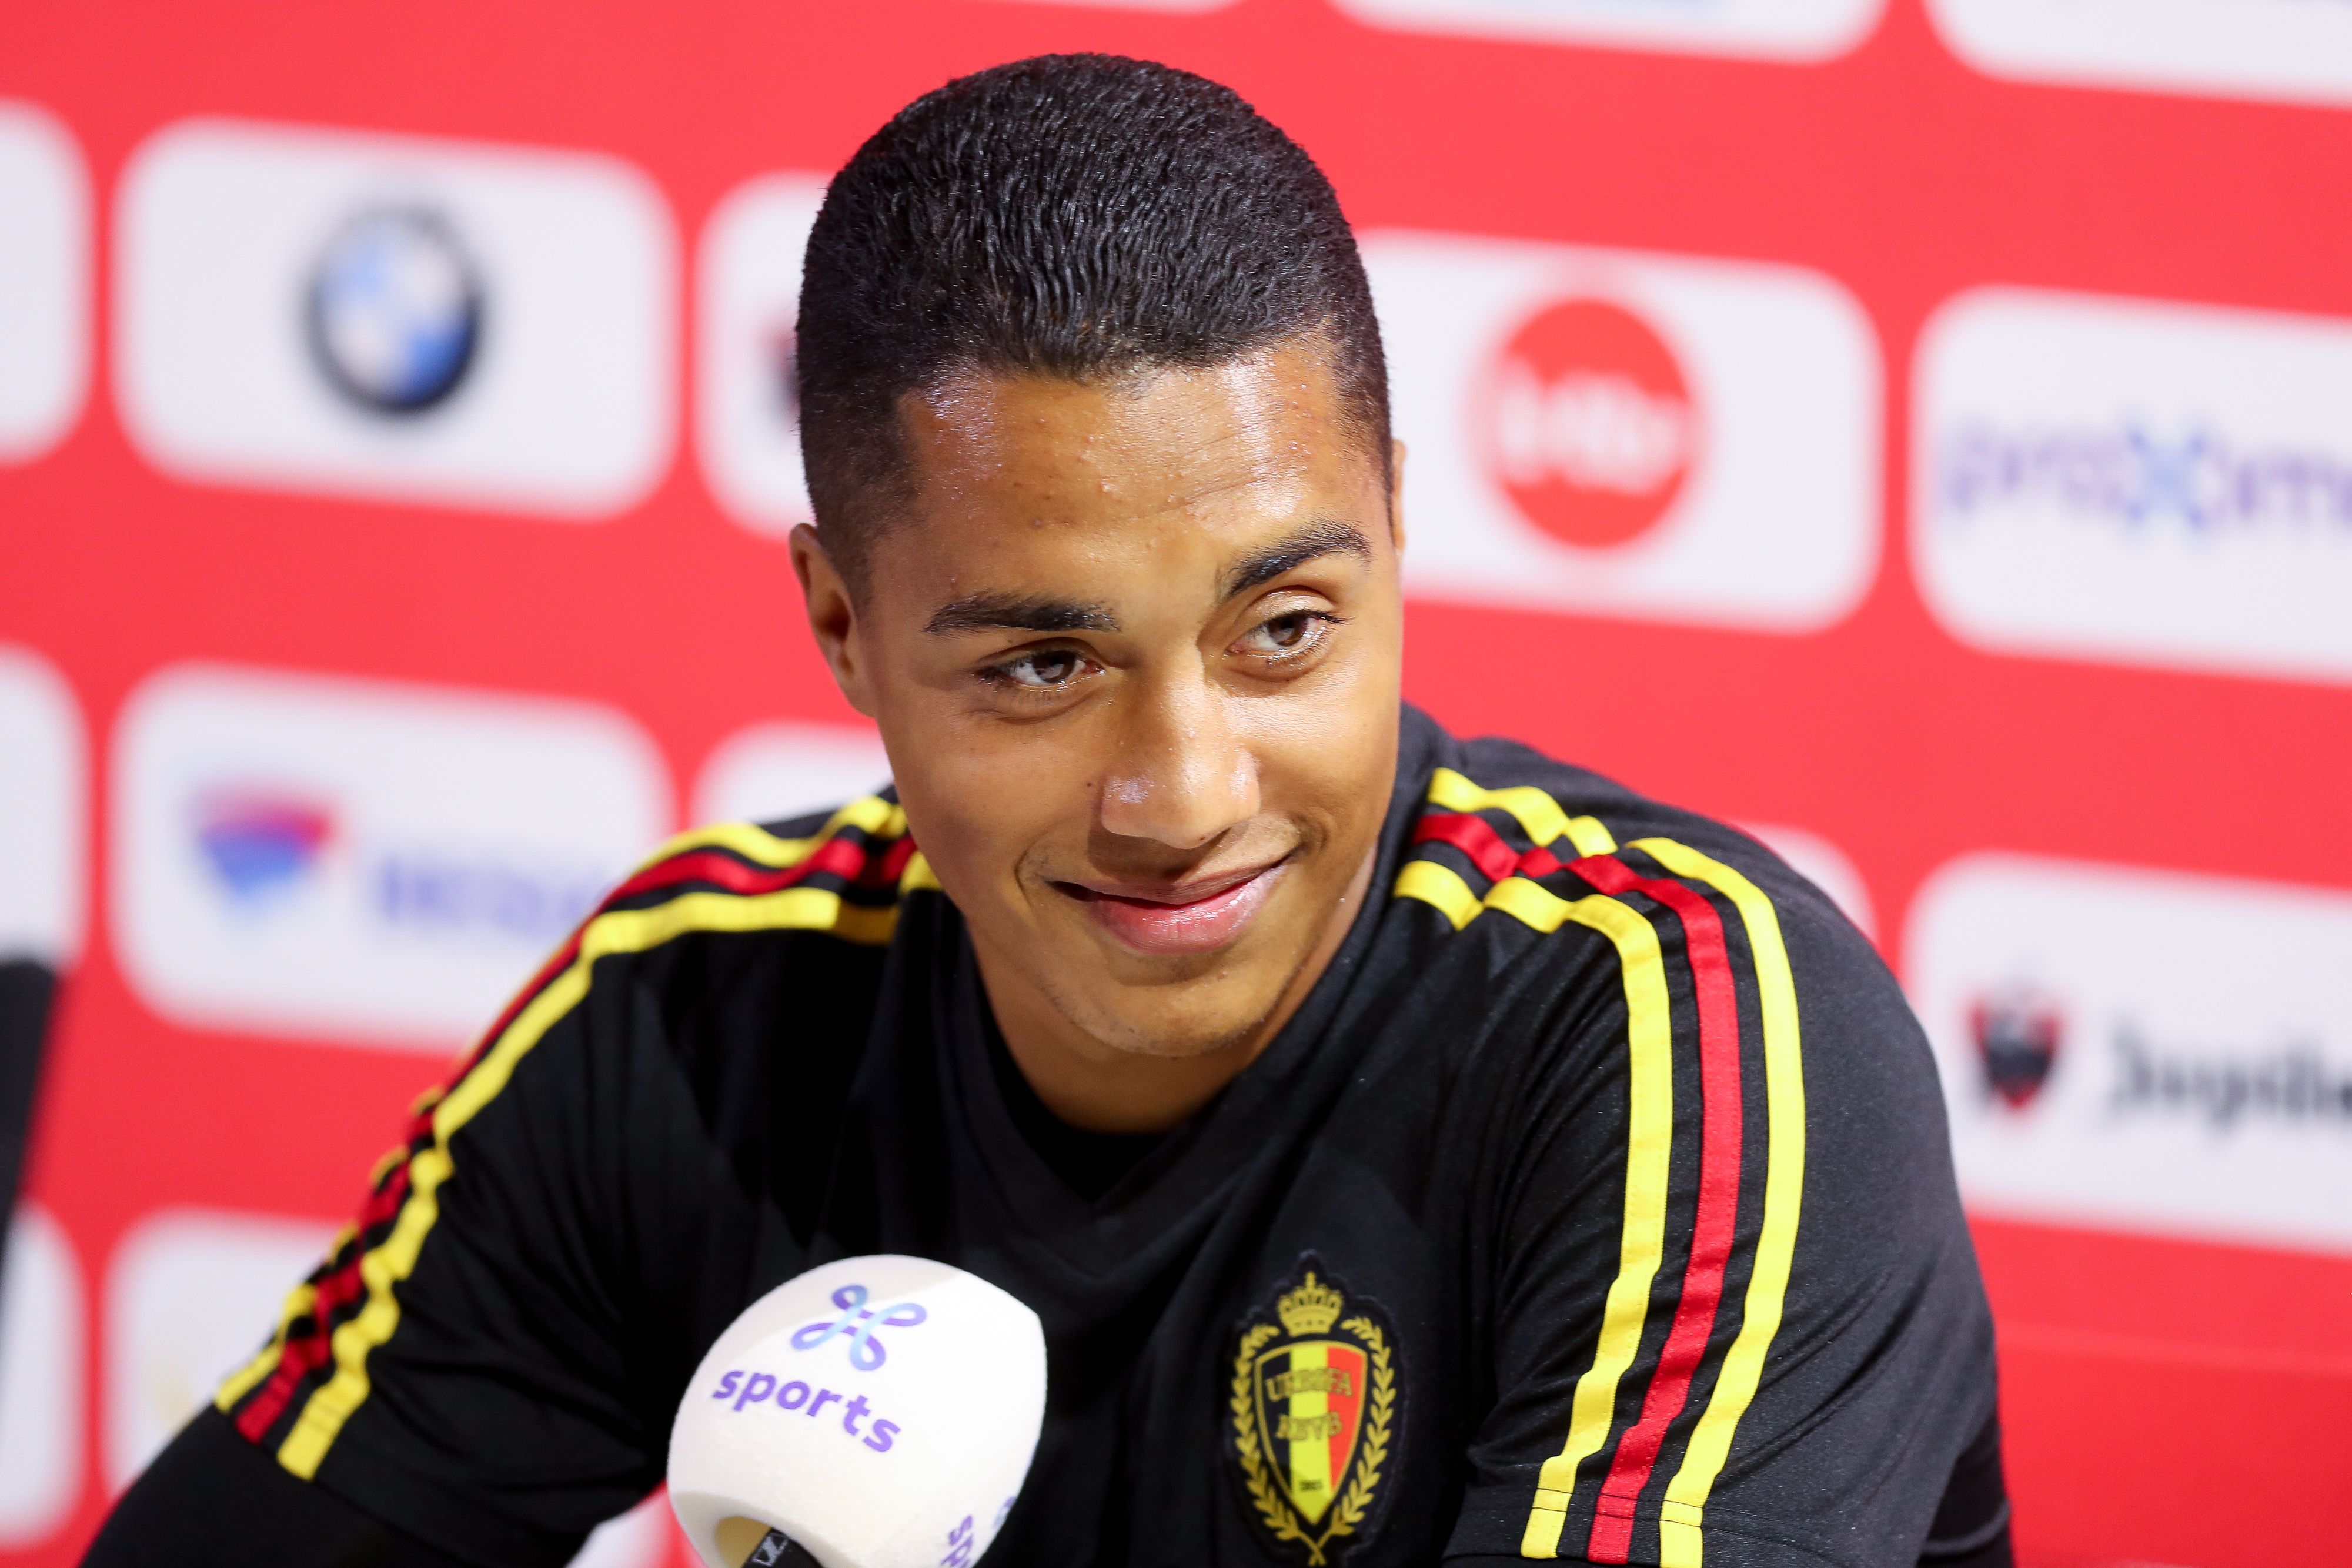 Belgium's Youri Tielemans gives a press conference before a training session of the Belgian national soccer team, the Red Devils, on June 6, 2019, ahead of their UEFA Euro 2020 qualifying football matches against Kazakhstan and Scotland. (Photo by BRUNO FAHY / Belga / AFP) / Belgium OUT        (Photo credit should read BRUNO FAHY/AFP/Getty Images)